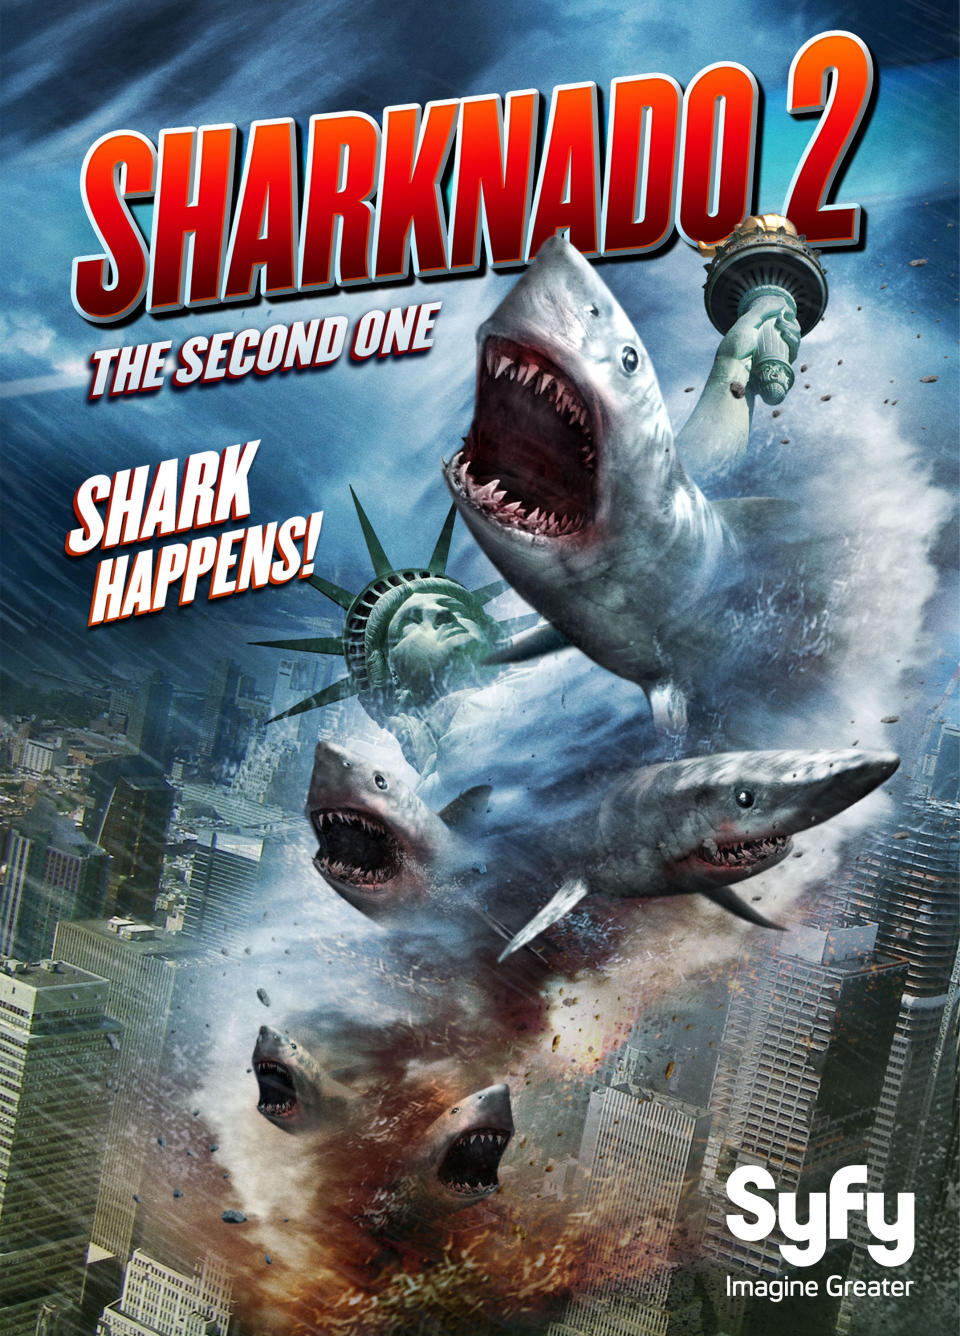 This photo released by NBCUniversal shows the key art for "Sharknado 2: The Second One." The new movie will take a bite out of New York City on July 30, 2014, in Syfy's sequel to the campy classic that aired last summer. (AP Photo/NBCUniversal)